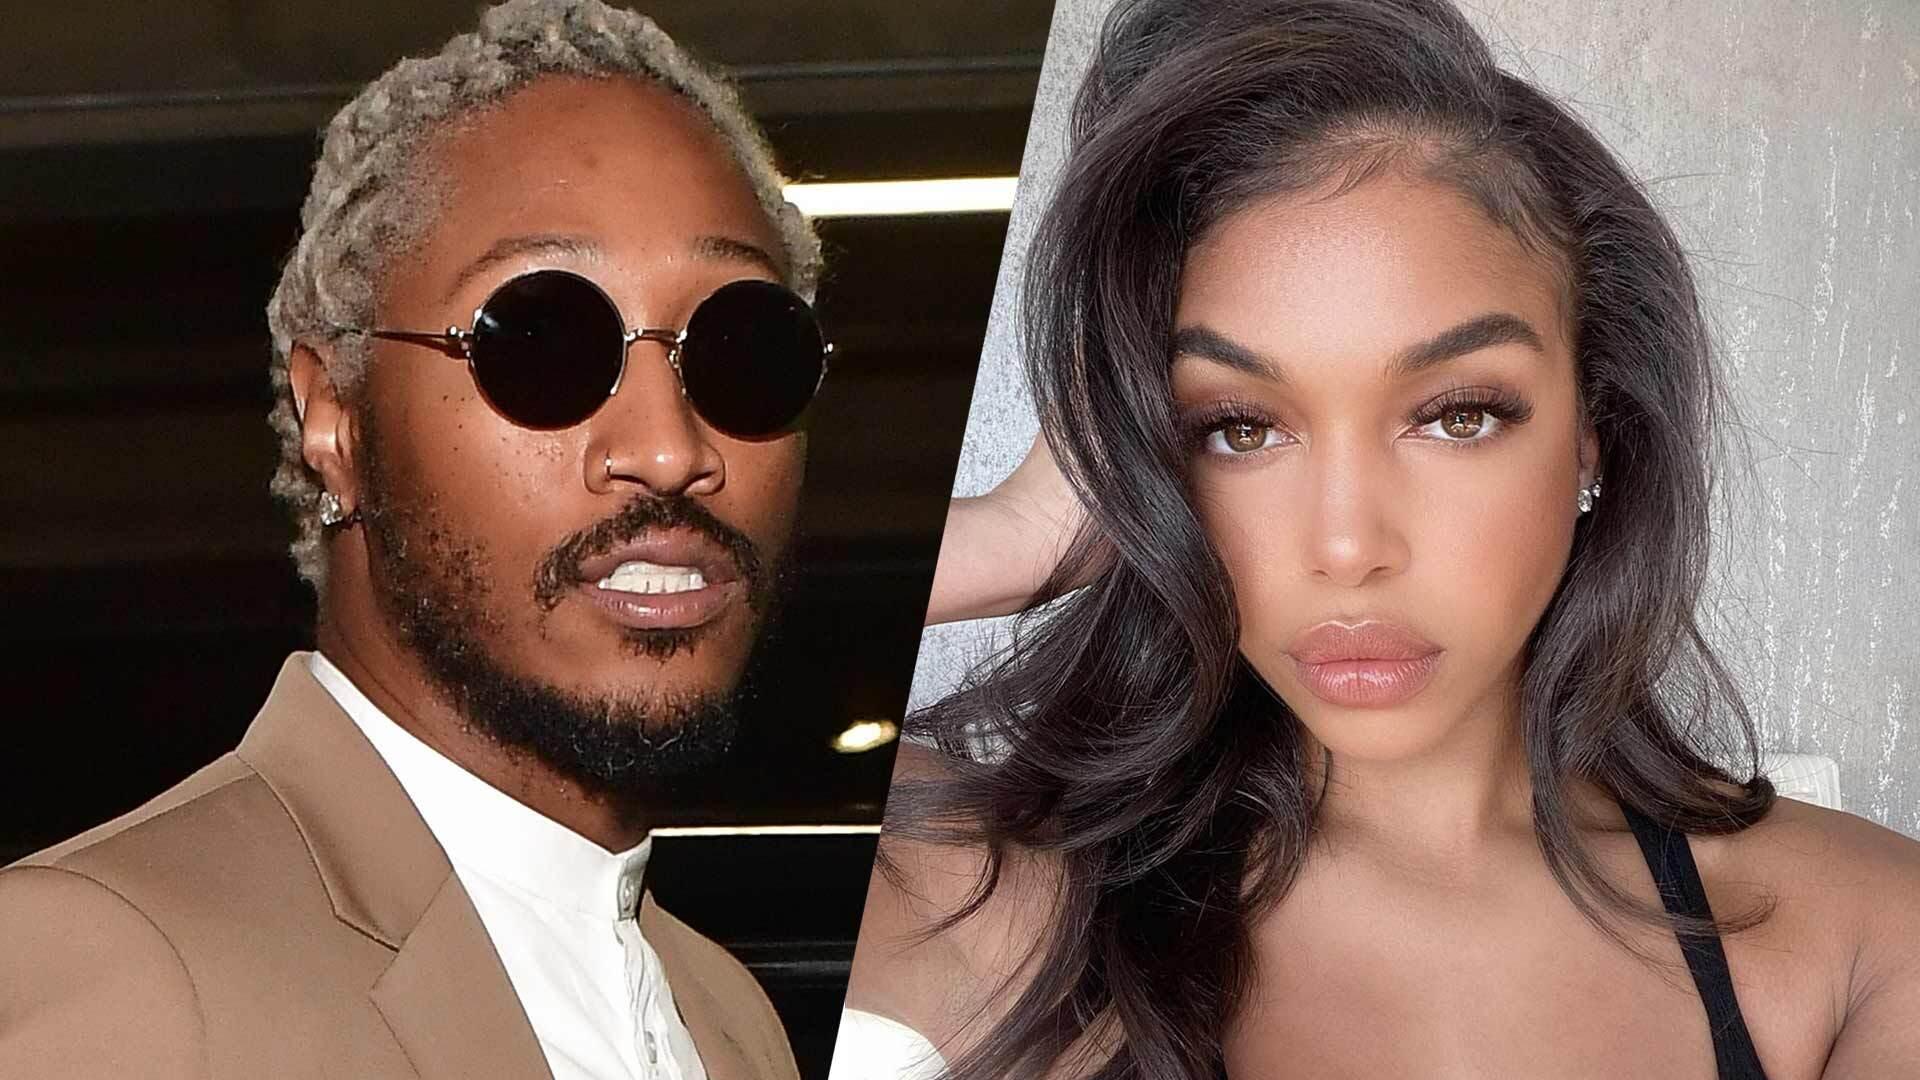 Futures Girlfriend Lori Harvey Pretty In Pink While Locked Up With Rapper The Blast